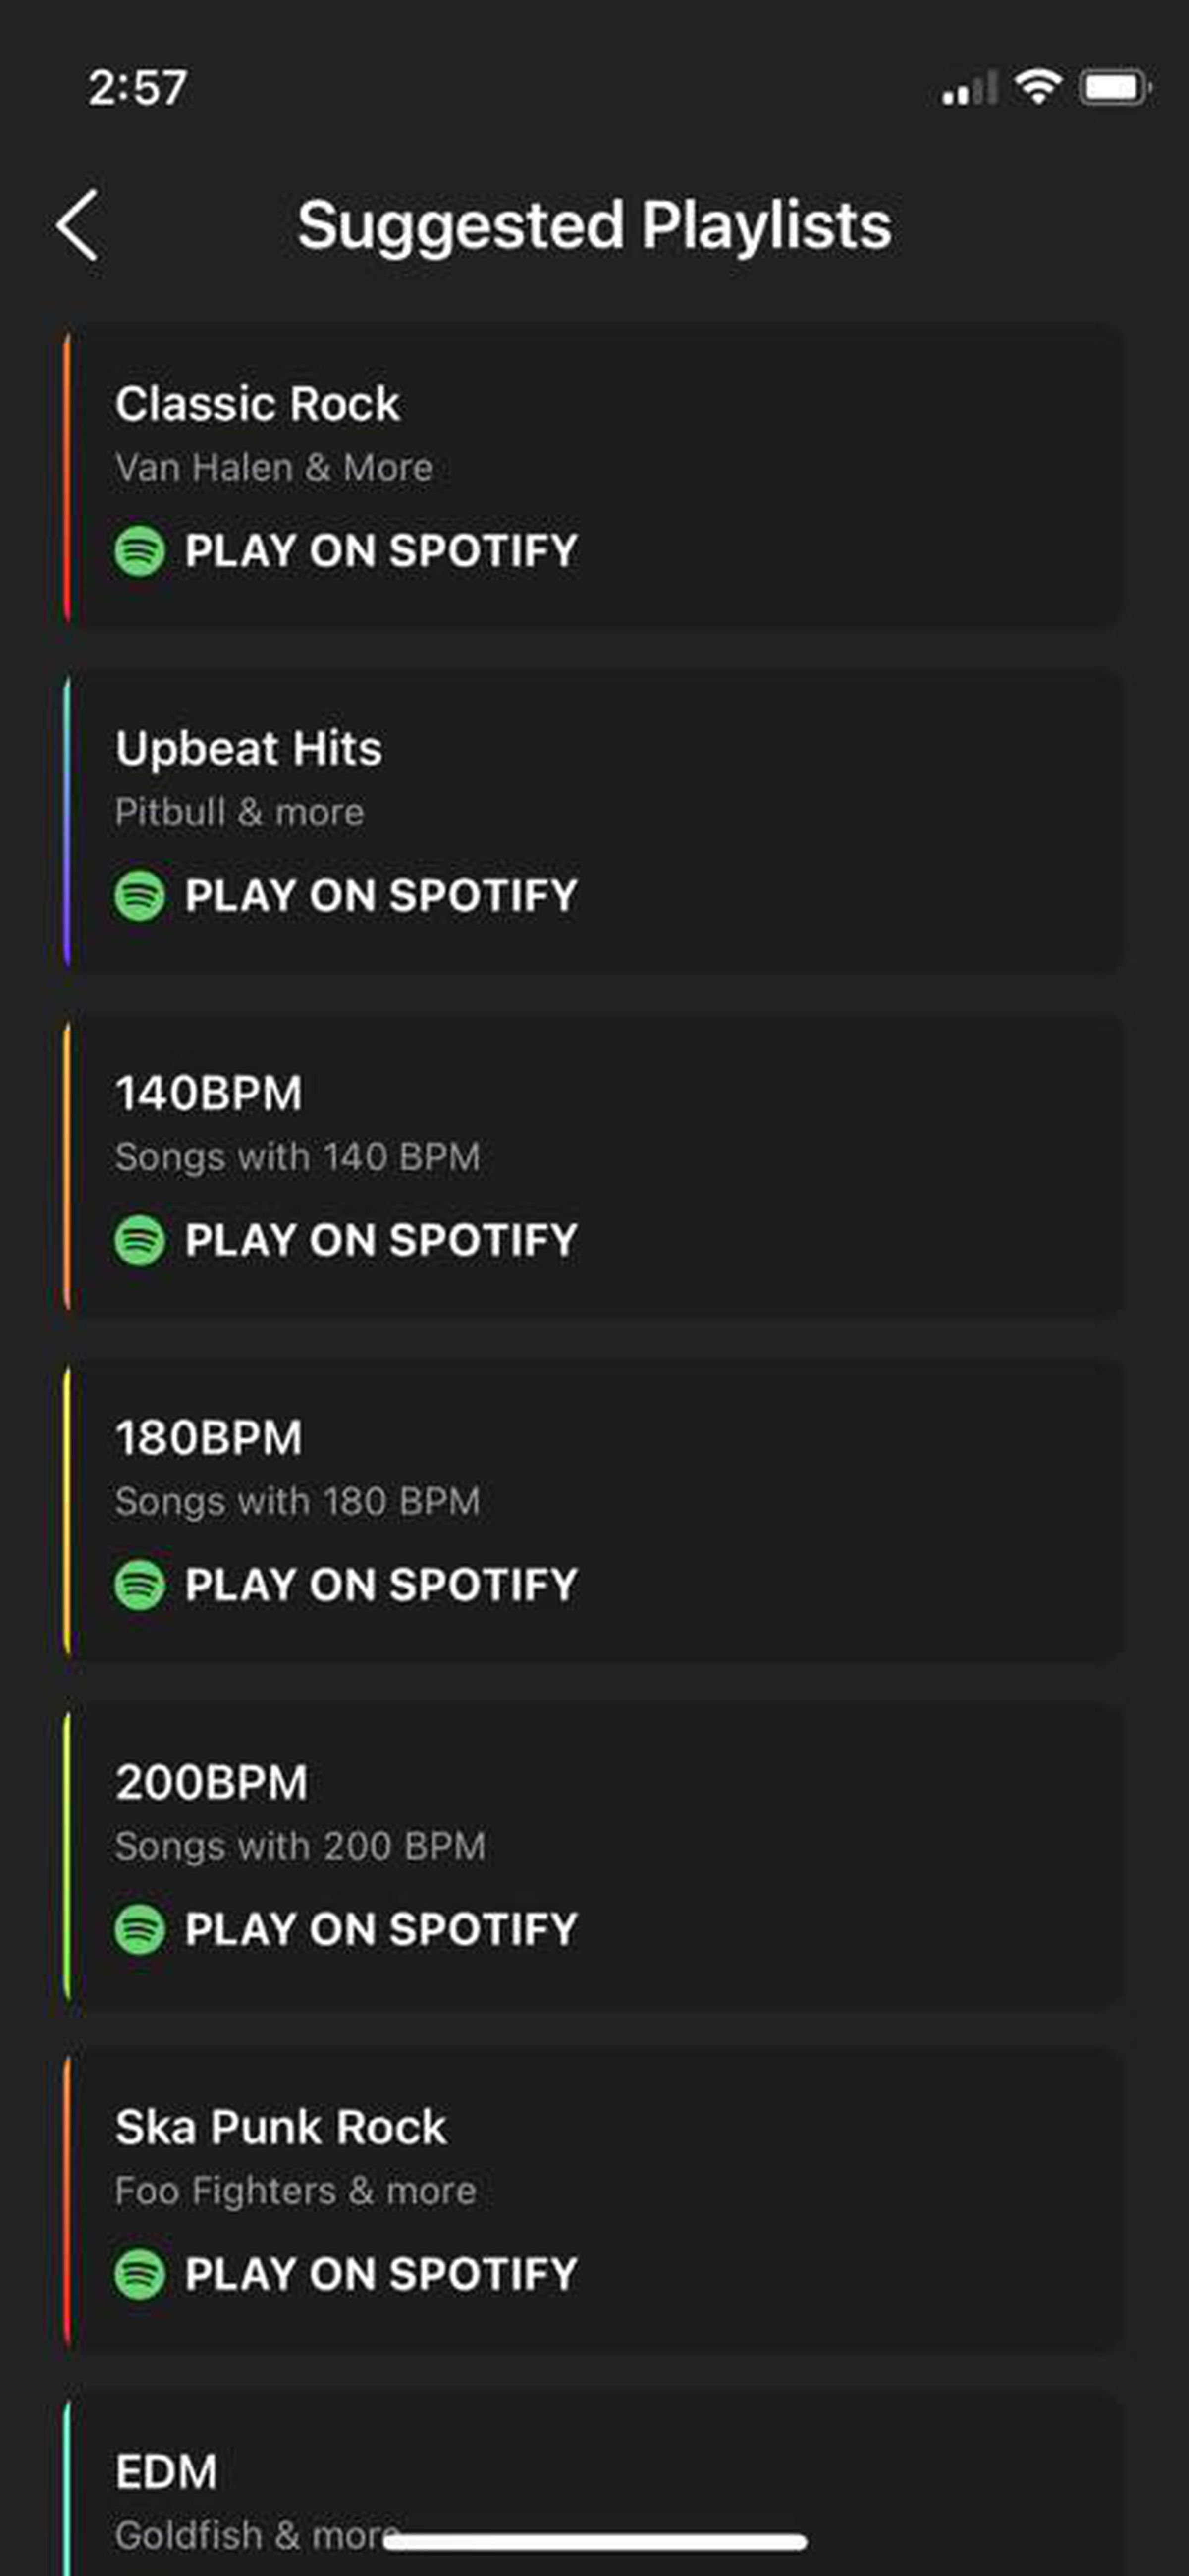 A screenshot of Crossrope’s curated Spotify playlists.